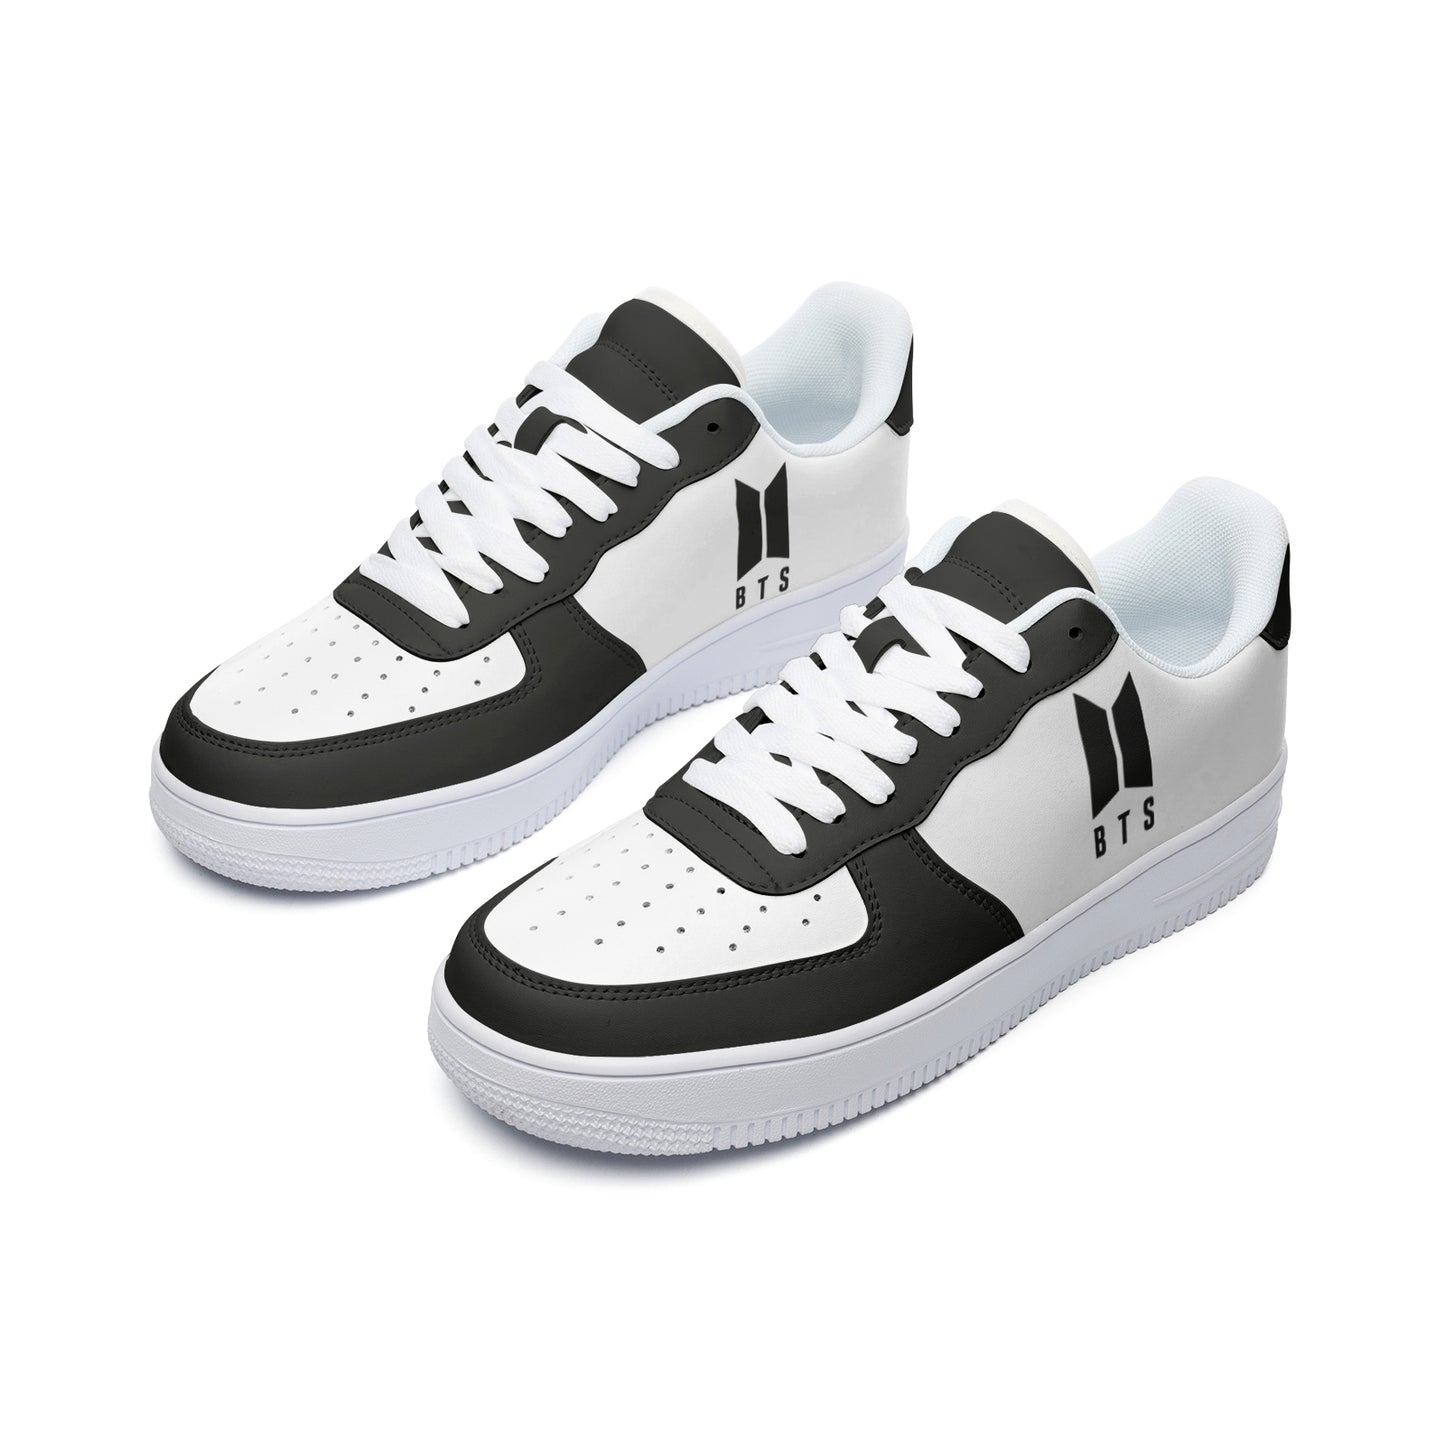 BTS Logo Unisex Low Top Leather Sneakers Black - SD-style-shop